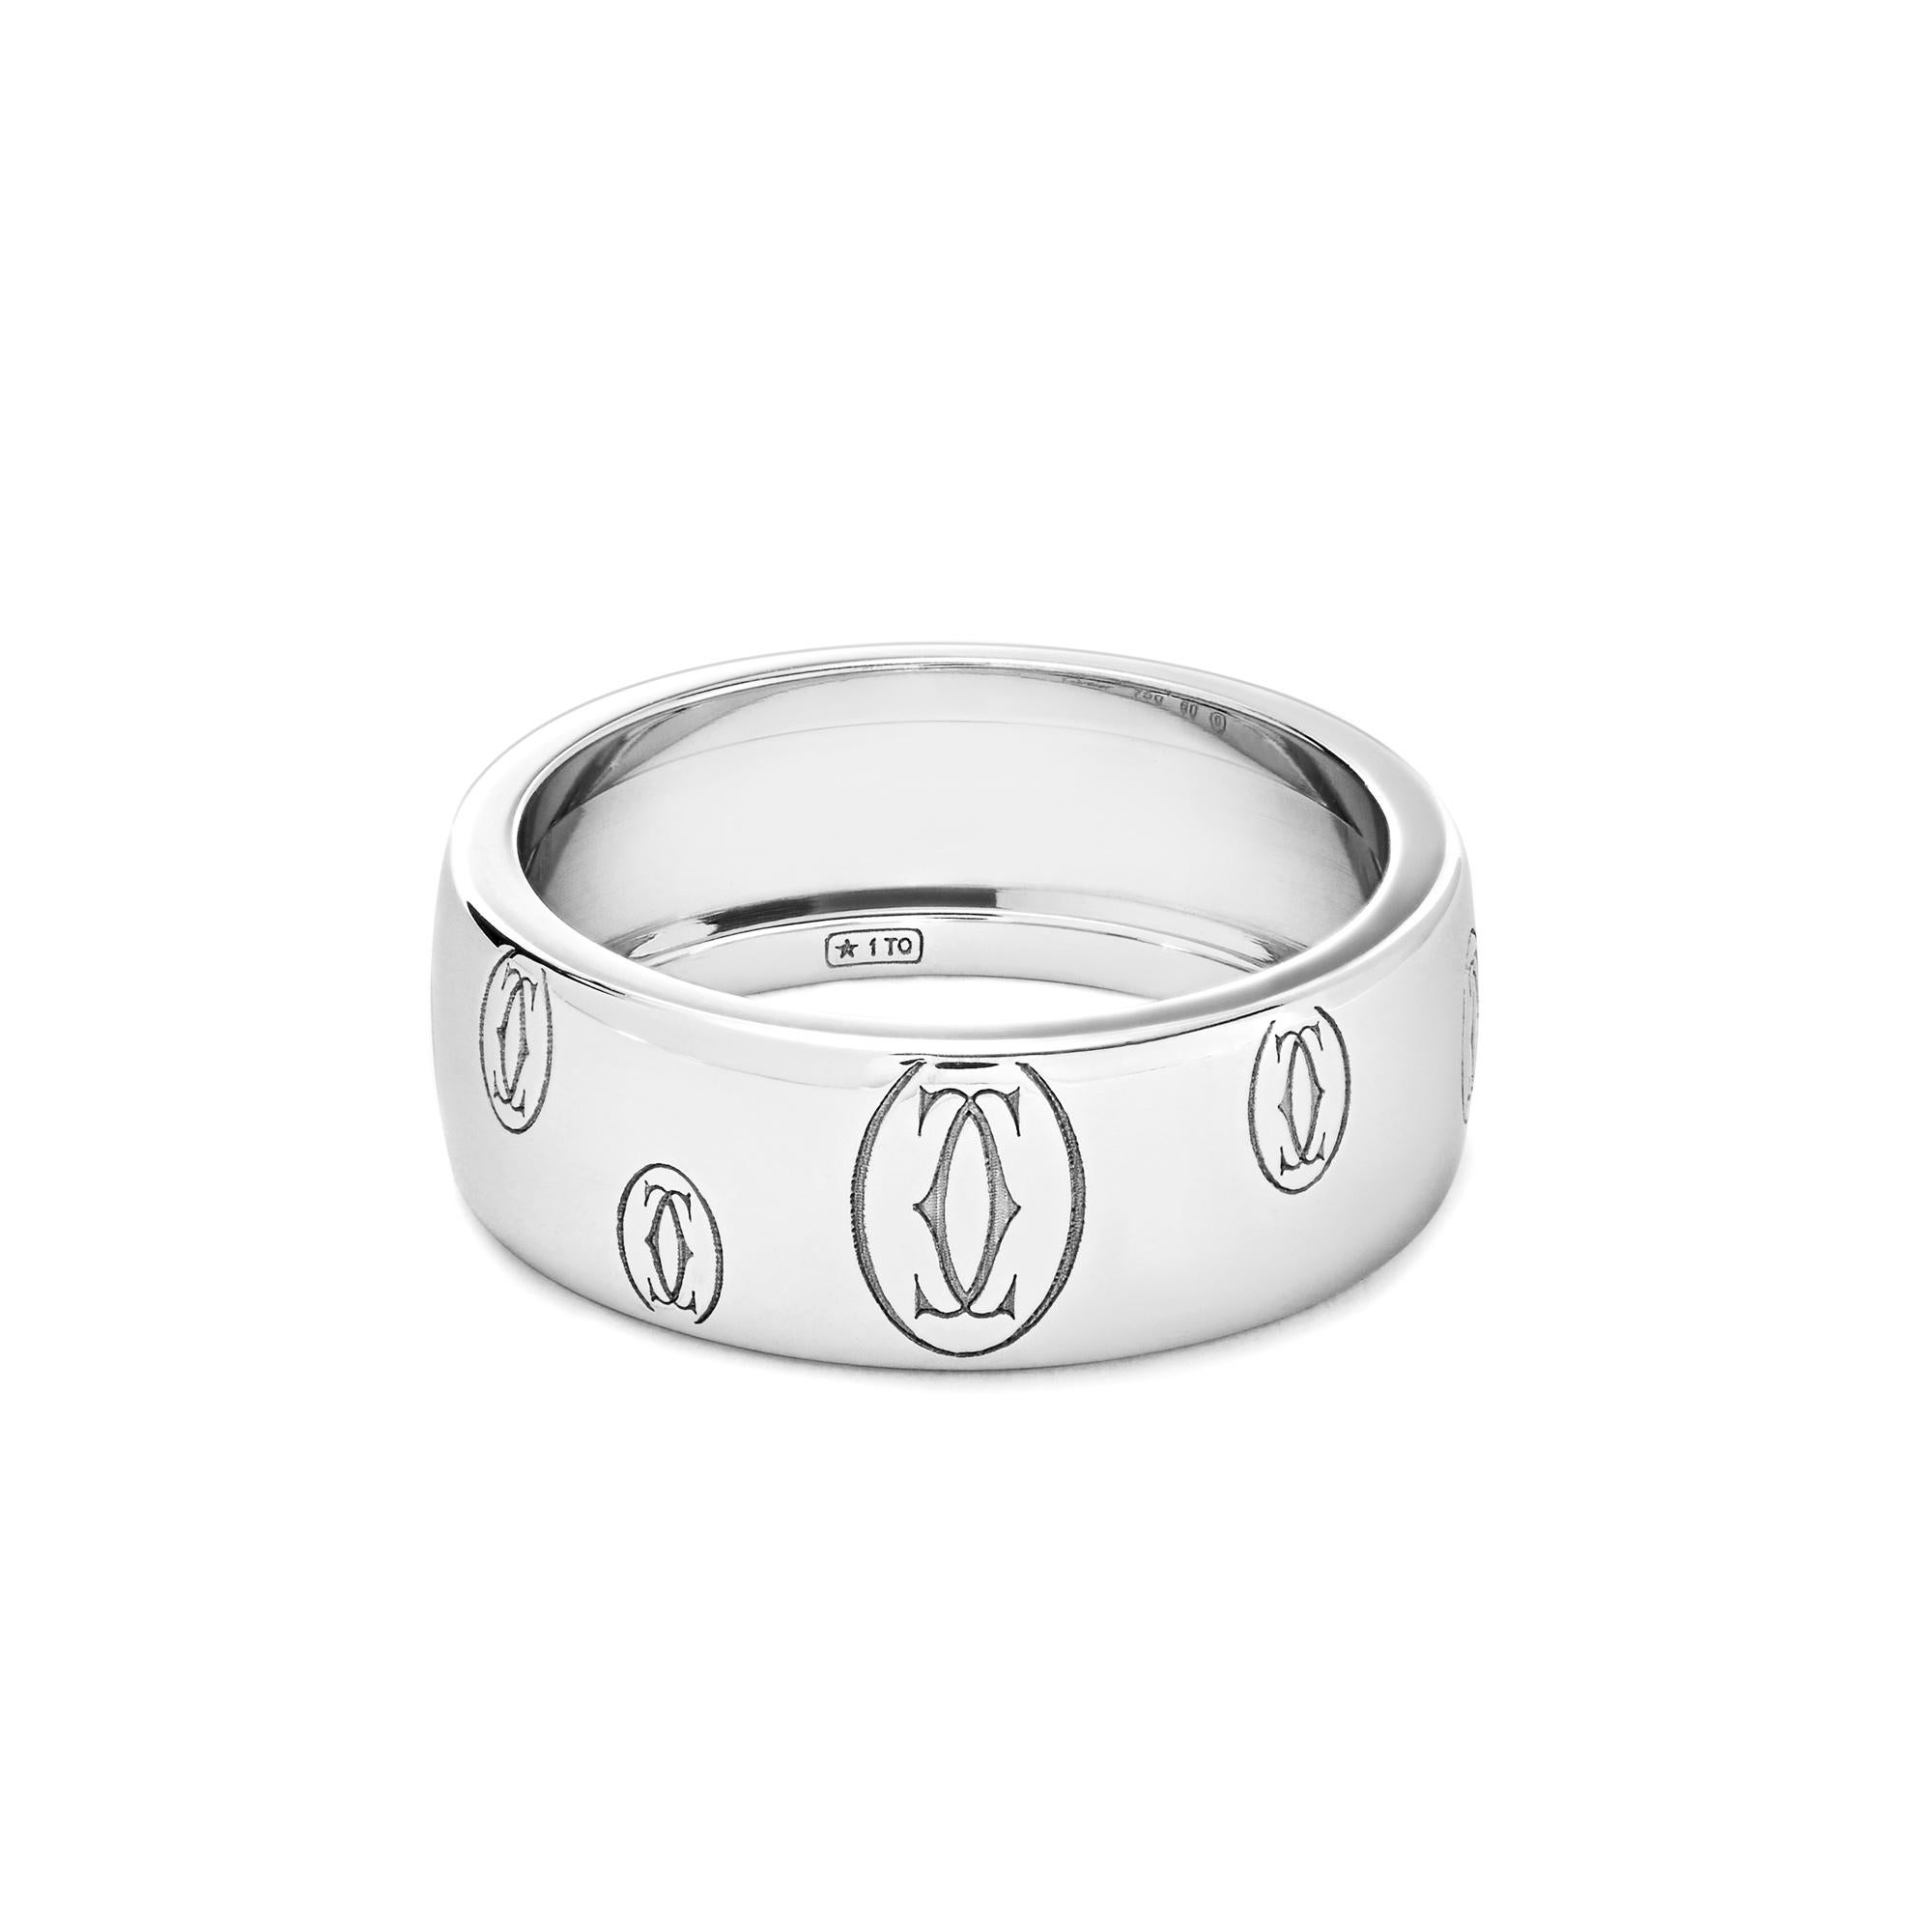 This 18-karat White Gold Cartier Wedding Bandexudes elegance and sophistication, crafted from luxurious 18k white gold. With its timeless design and impeccable craftsmanship, it serves as a symbol of everlasting love and commitment. The sleek and